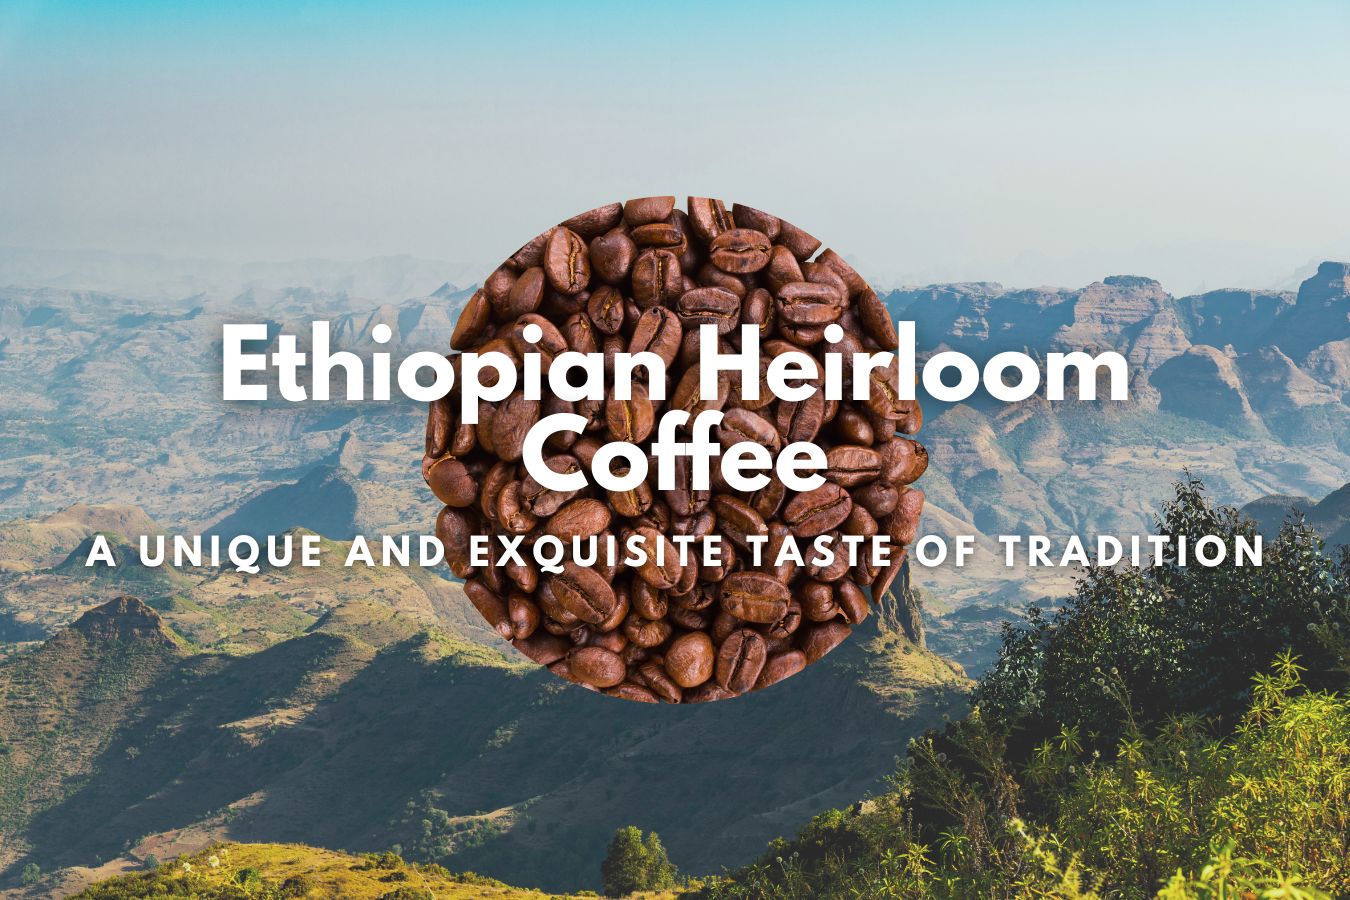 Ethiopian Heirloom Coffee A Unique and Exquisite Taste of Tradition